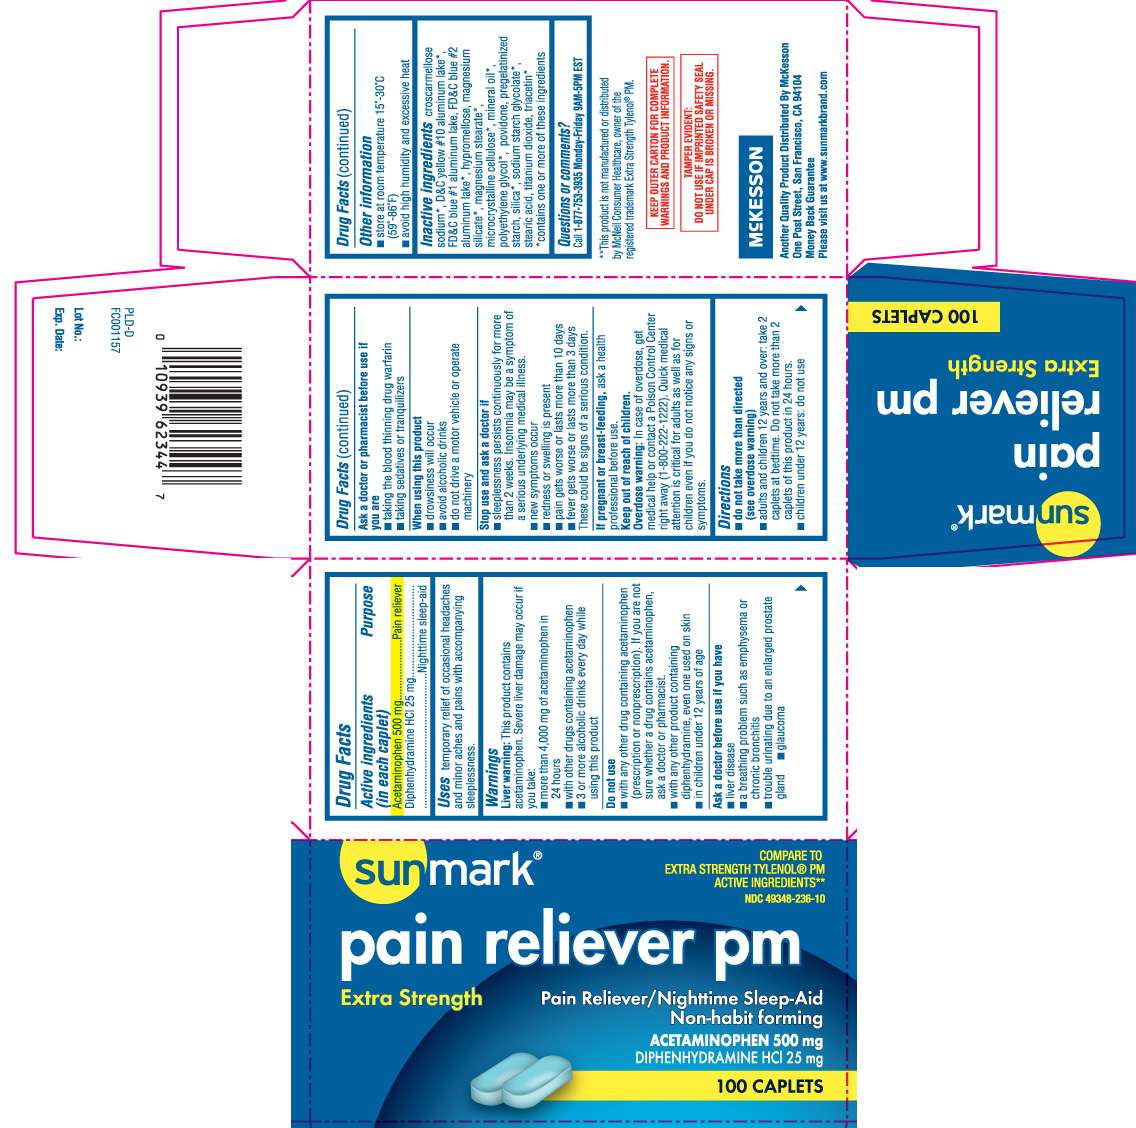 pain reliever pm